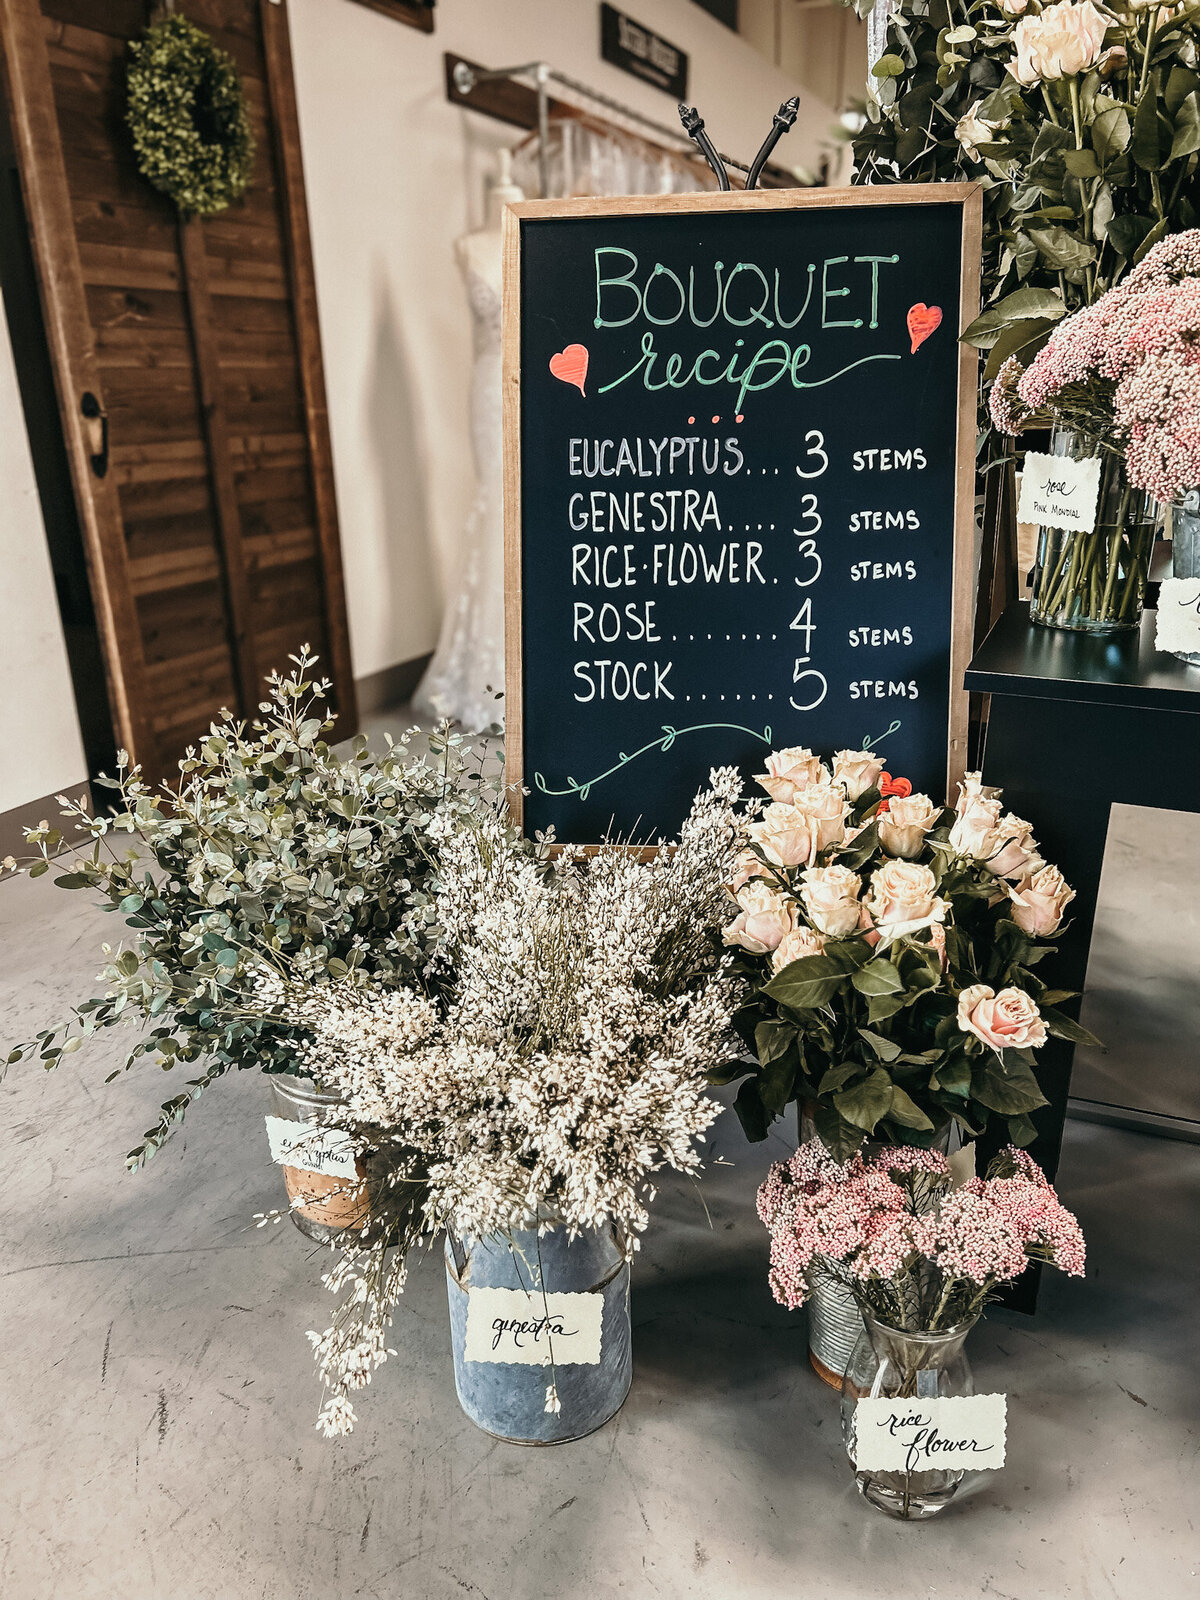 Bouquet recipe for DIY party